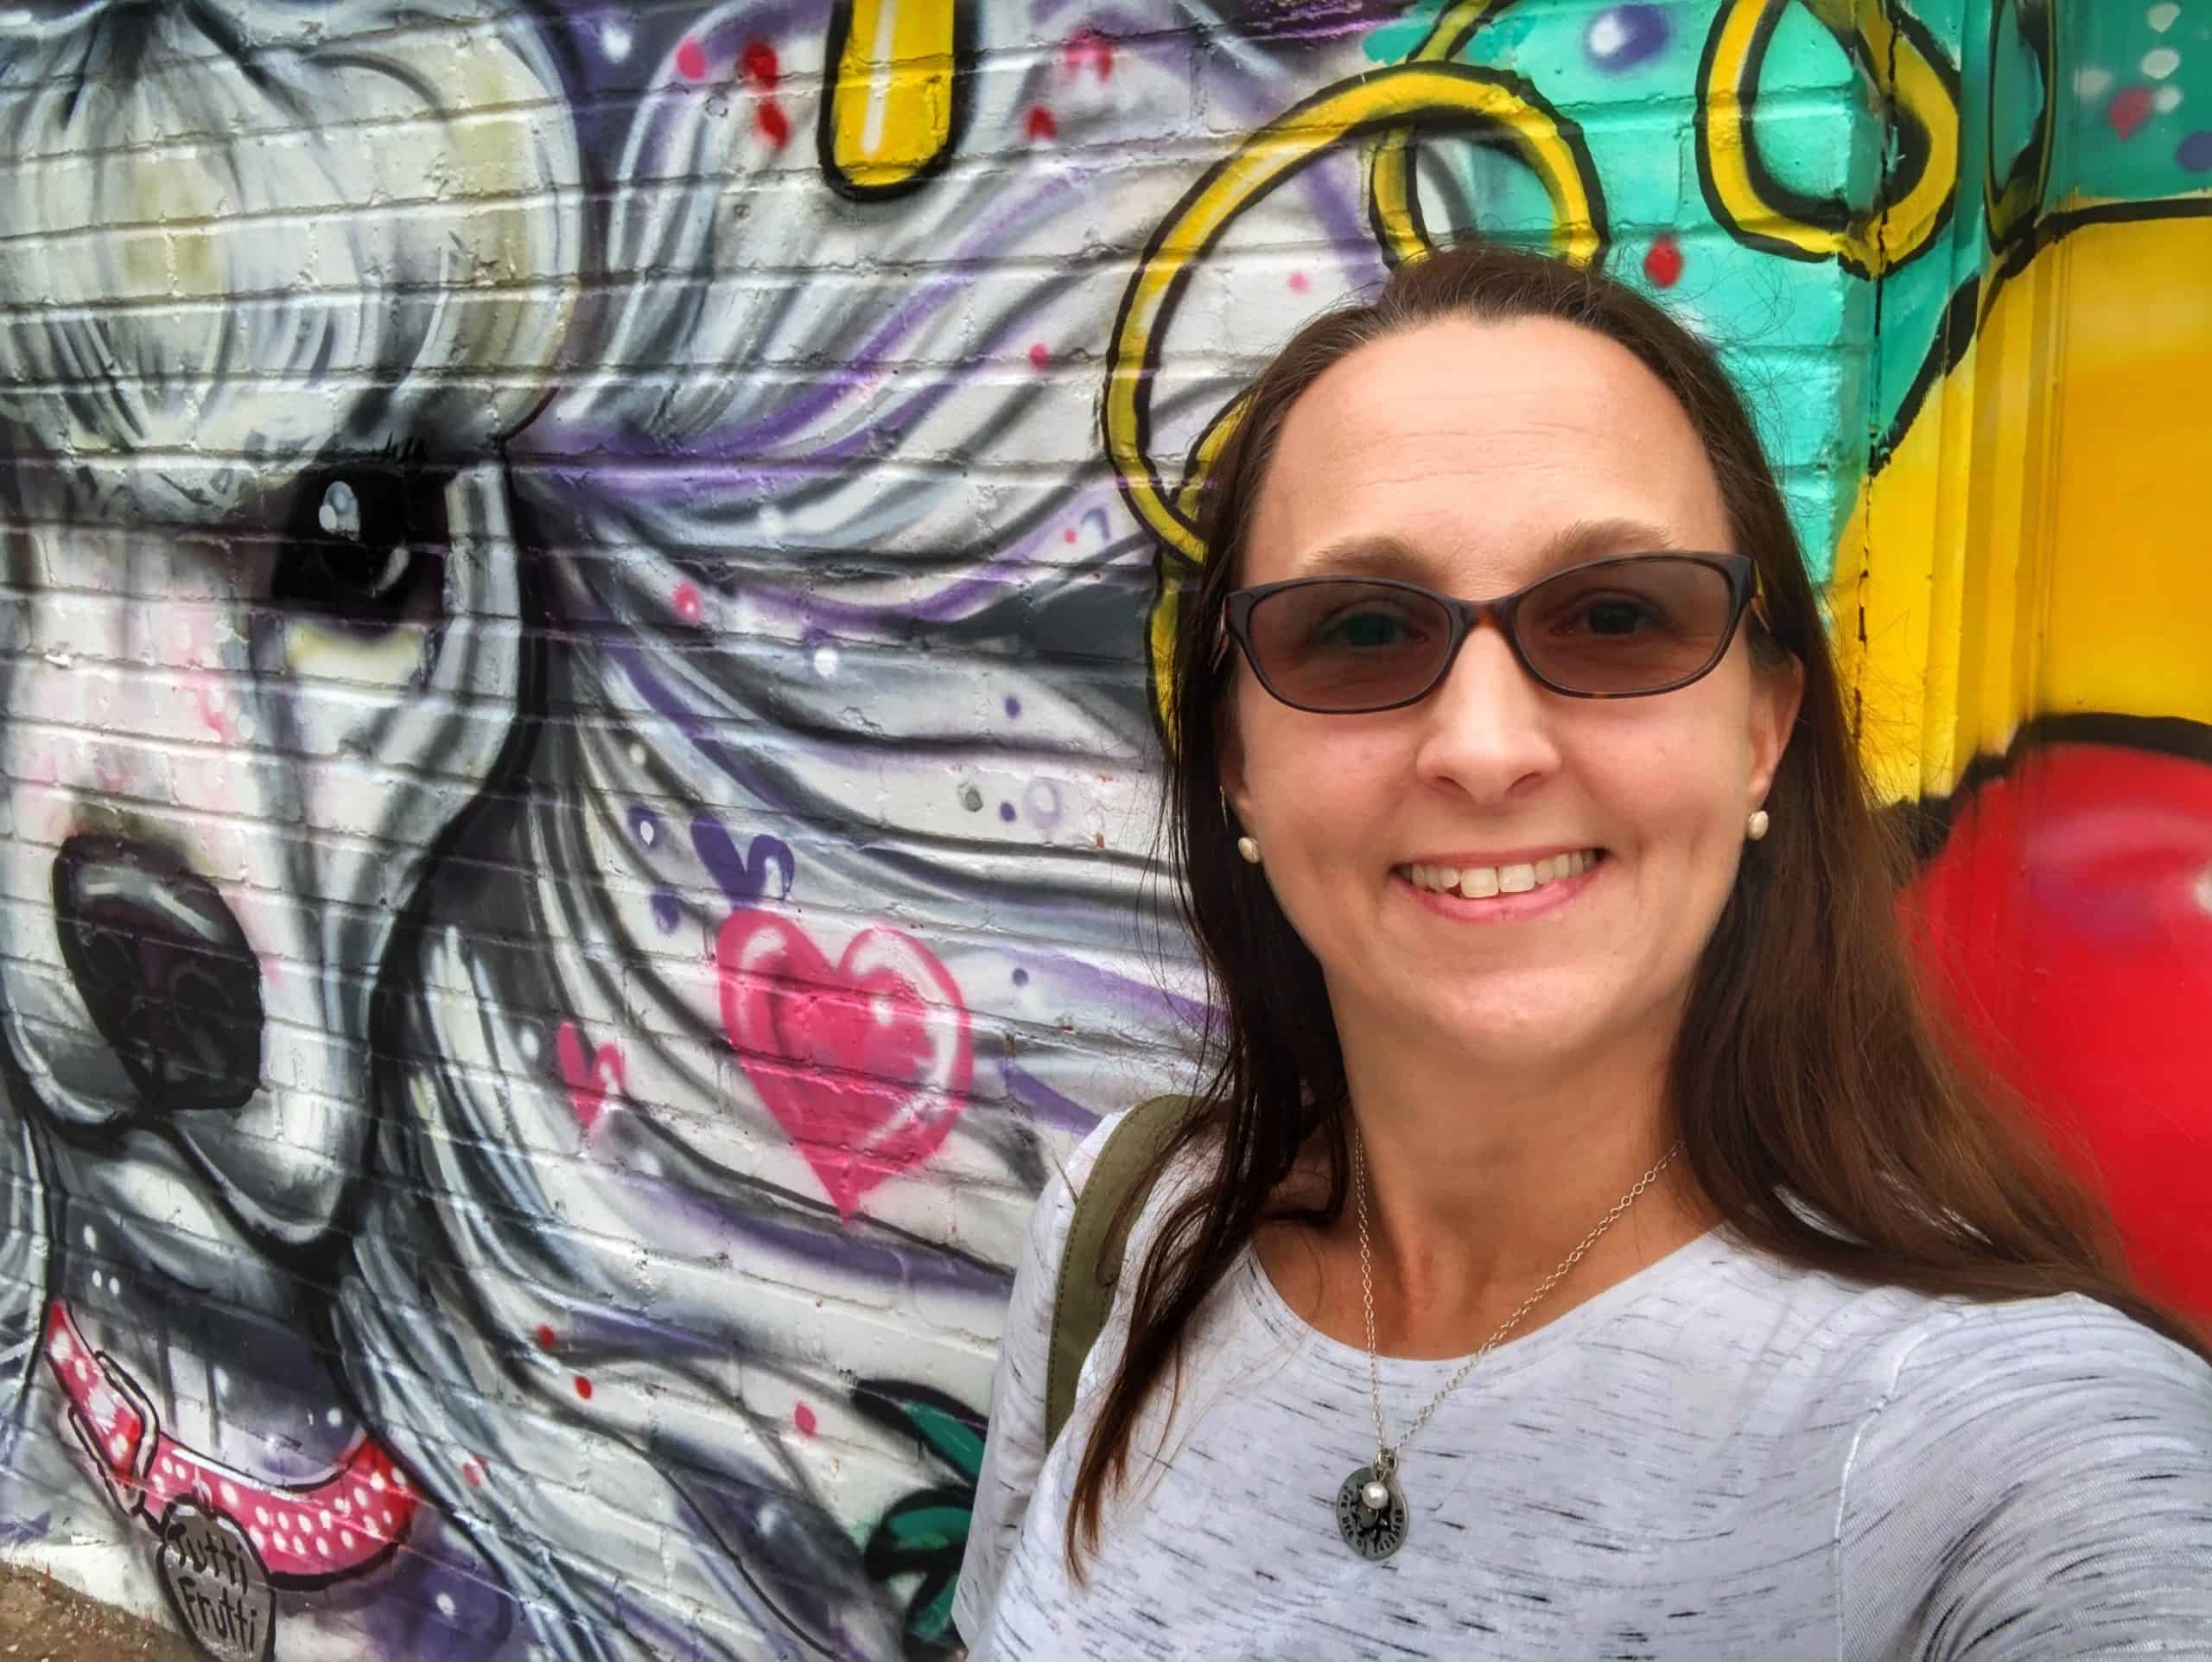 Best things to do in Oklahoma City OK - Nicky Omohundro - Plaza Walls mural selfie